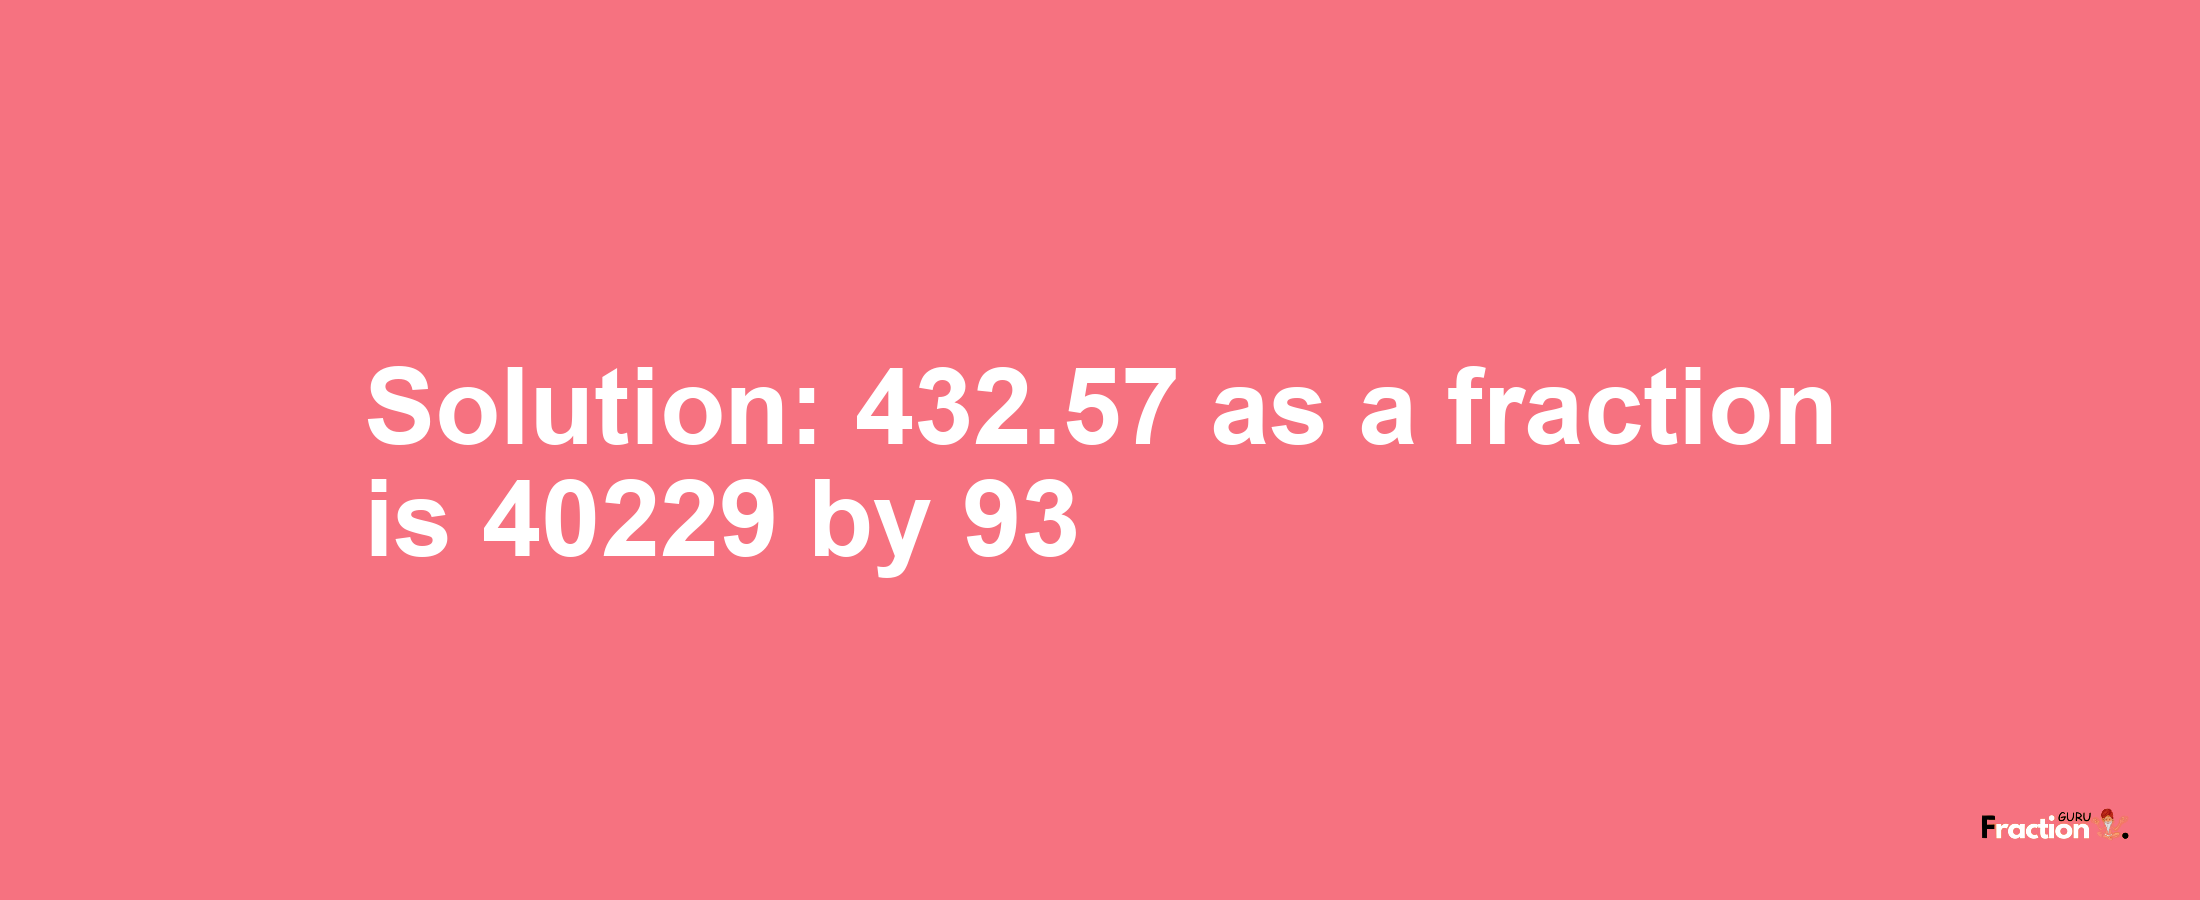 Solution:432.57 as a fraction is 40229/93